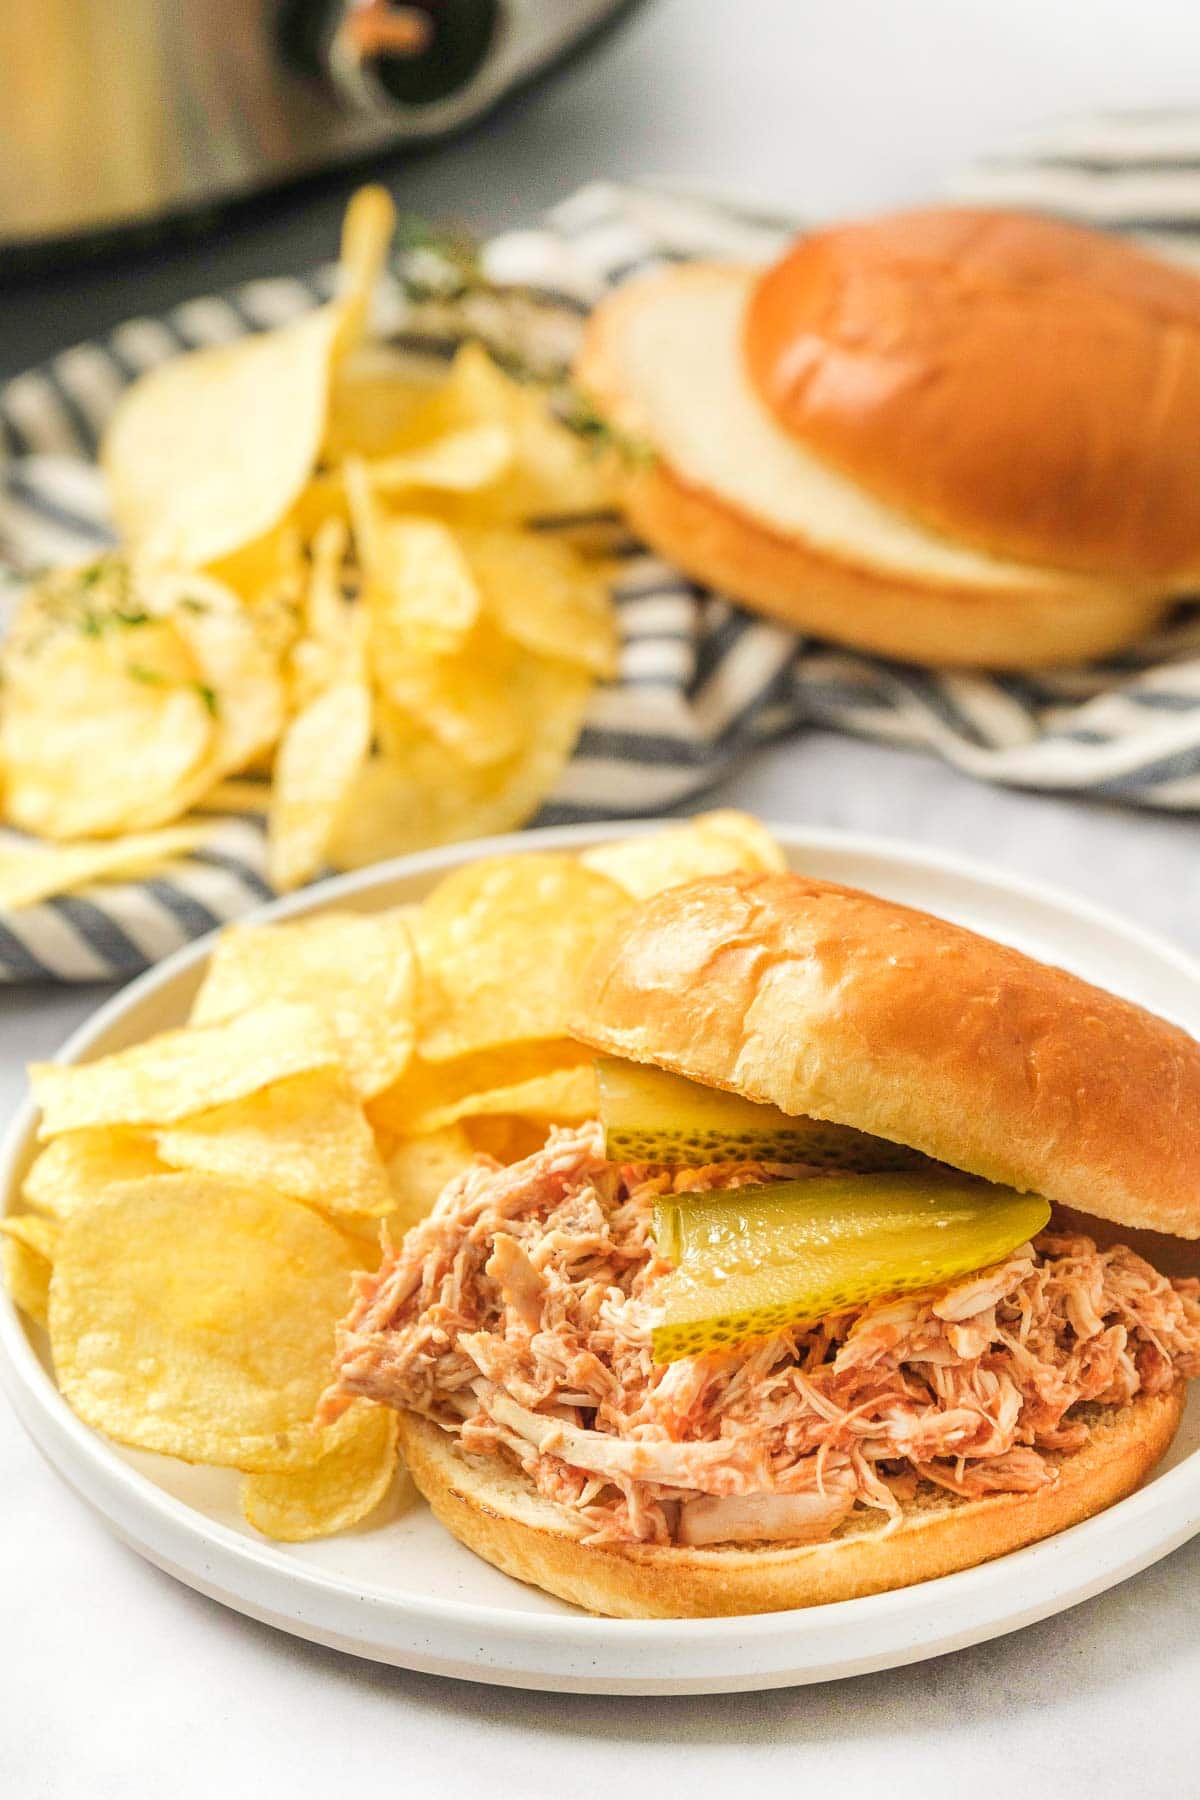 Chicken Sloppy Joes with slow cooker in background.